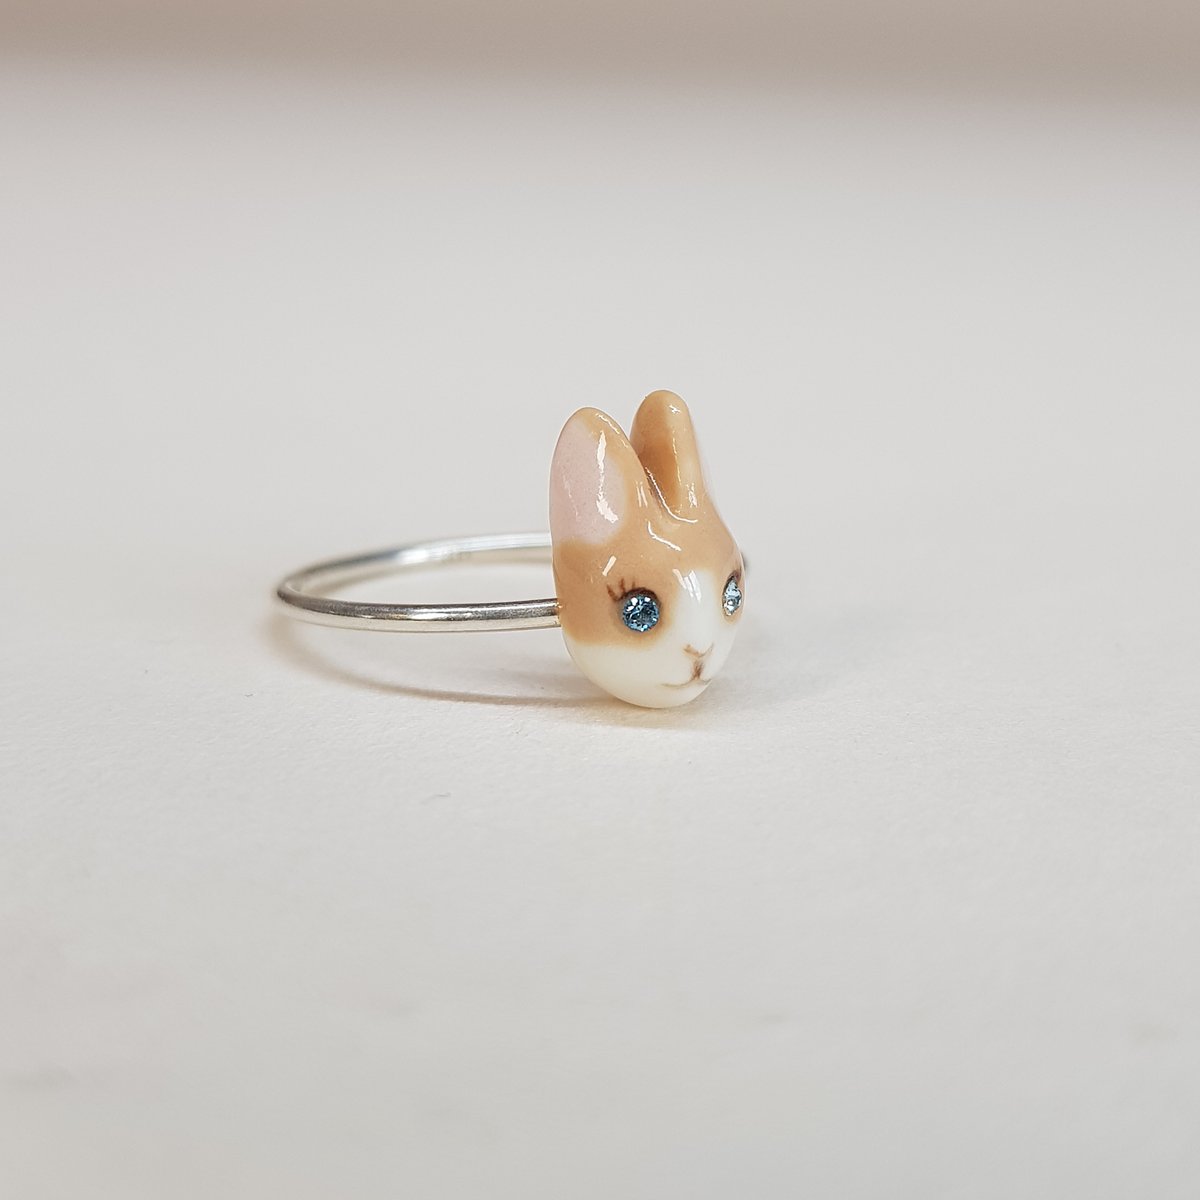 Image of Fawn Porcelain & Sterling Silver Bunny Ring